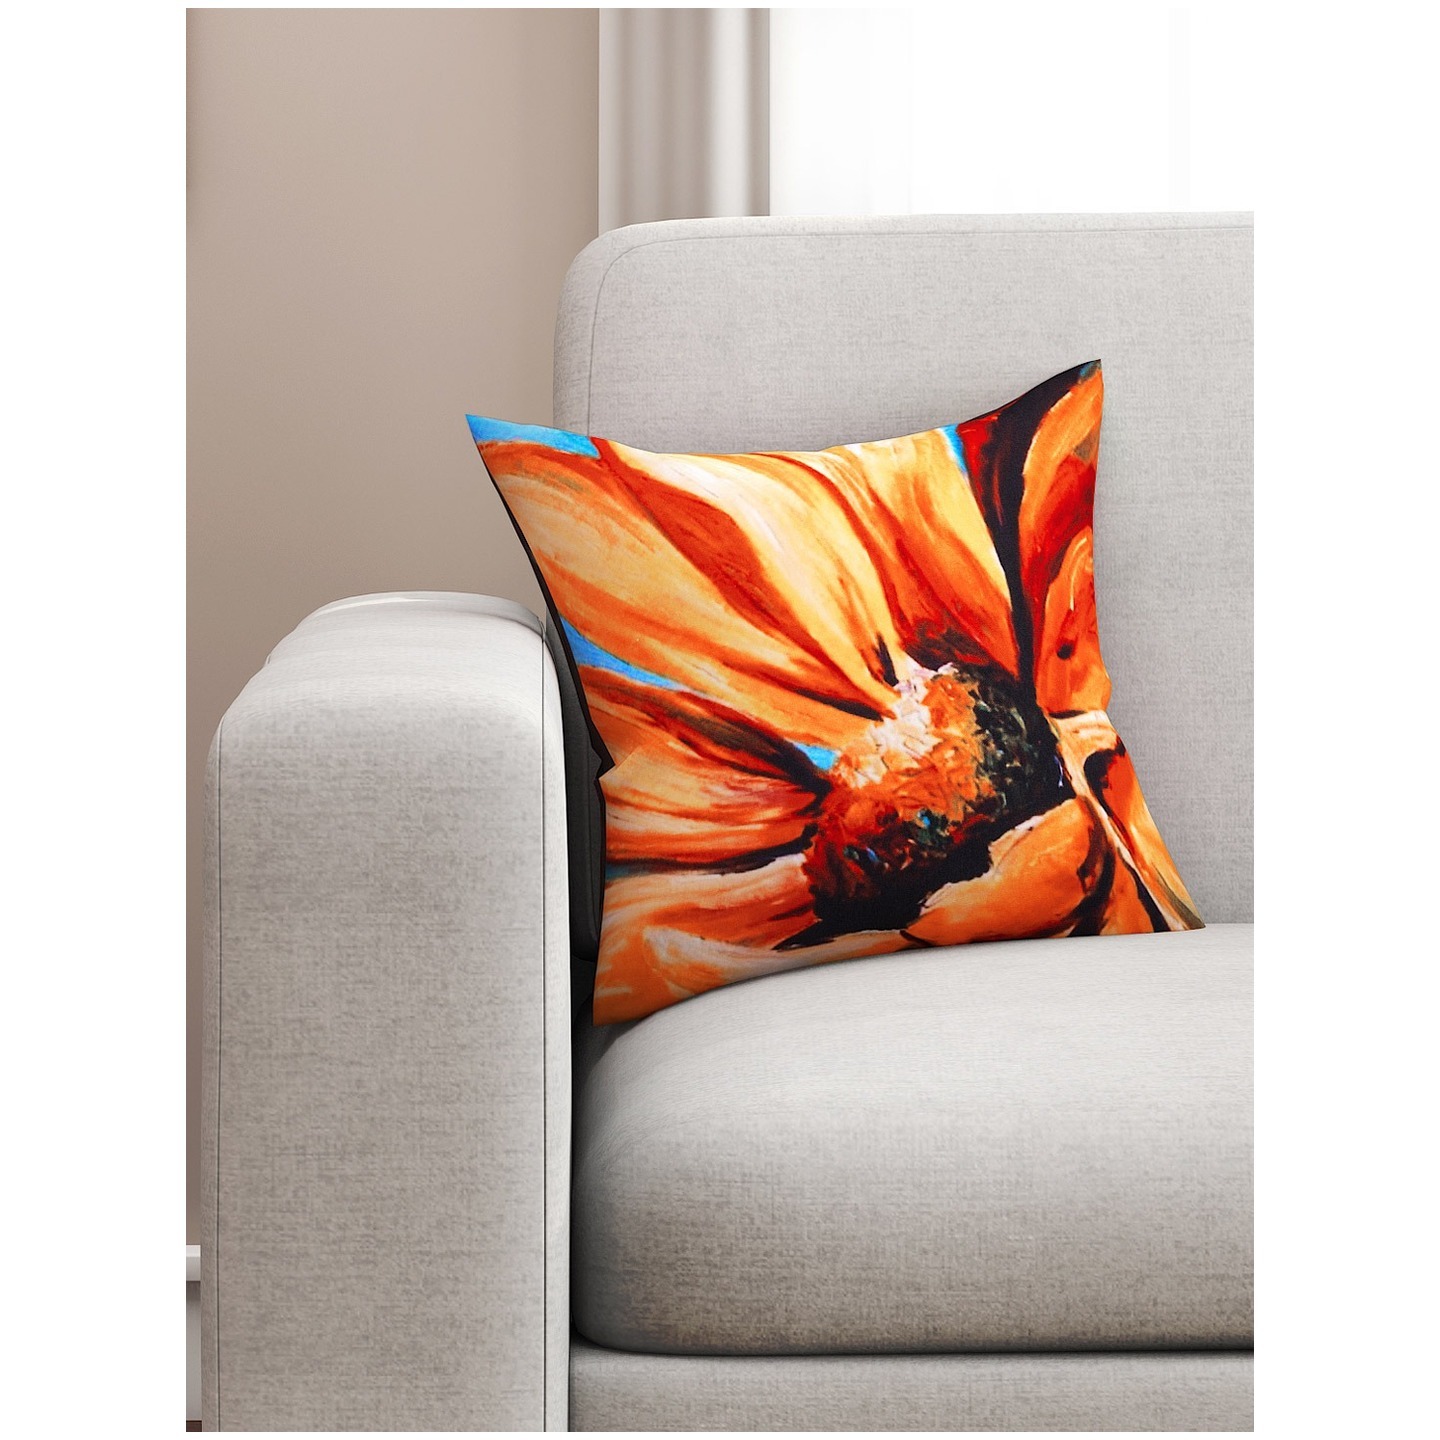 Cushion Cover Set of 1